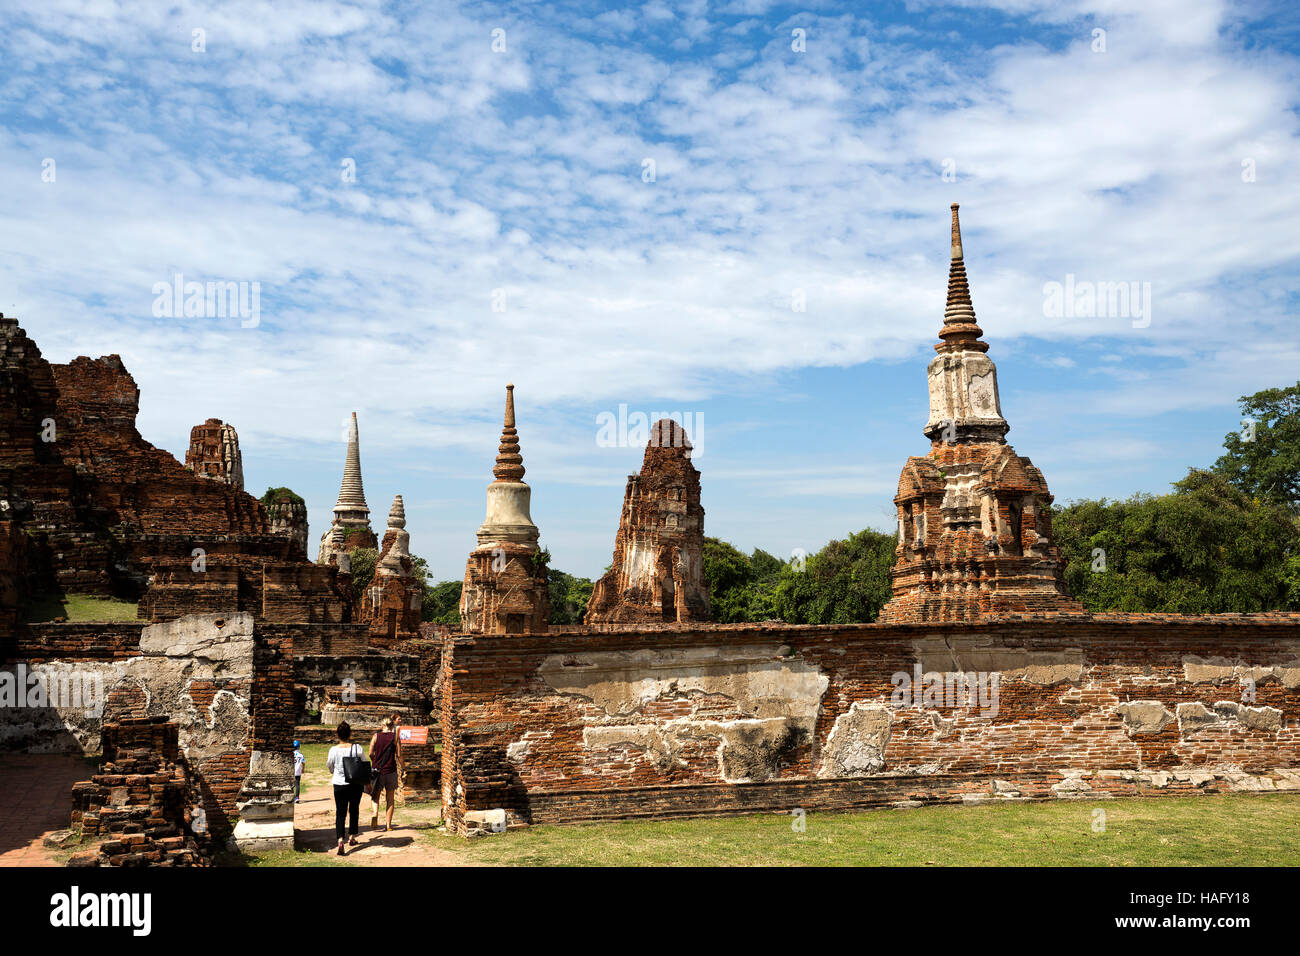 People visiting the Wat Mahathat temple complex in Ayutthaya, central Thailand Stock Photo